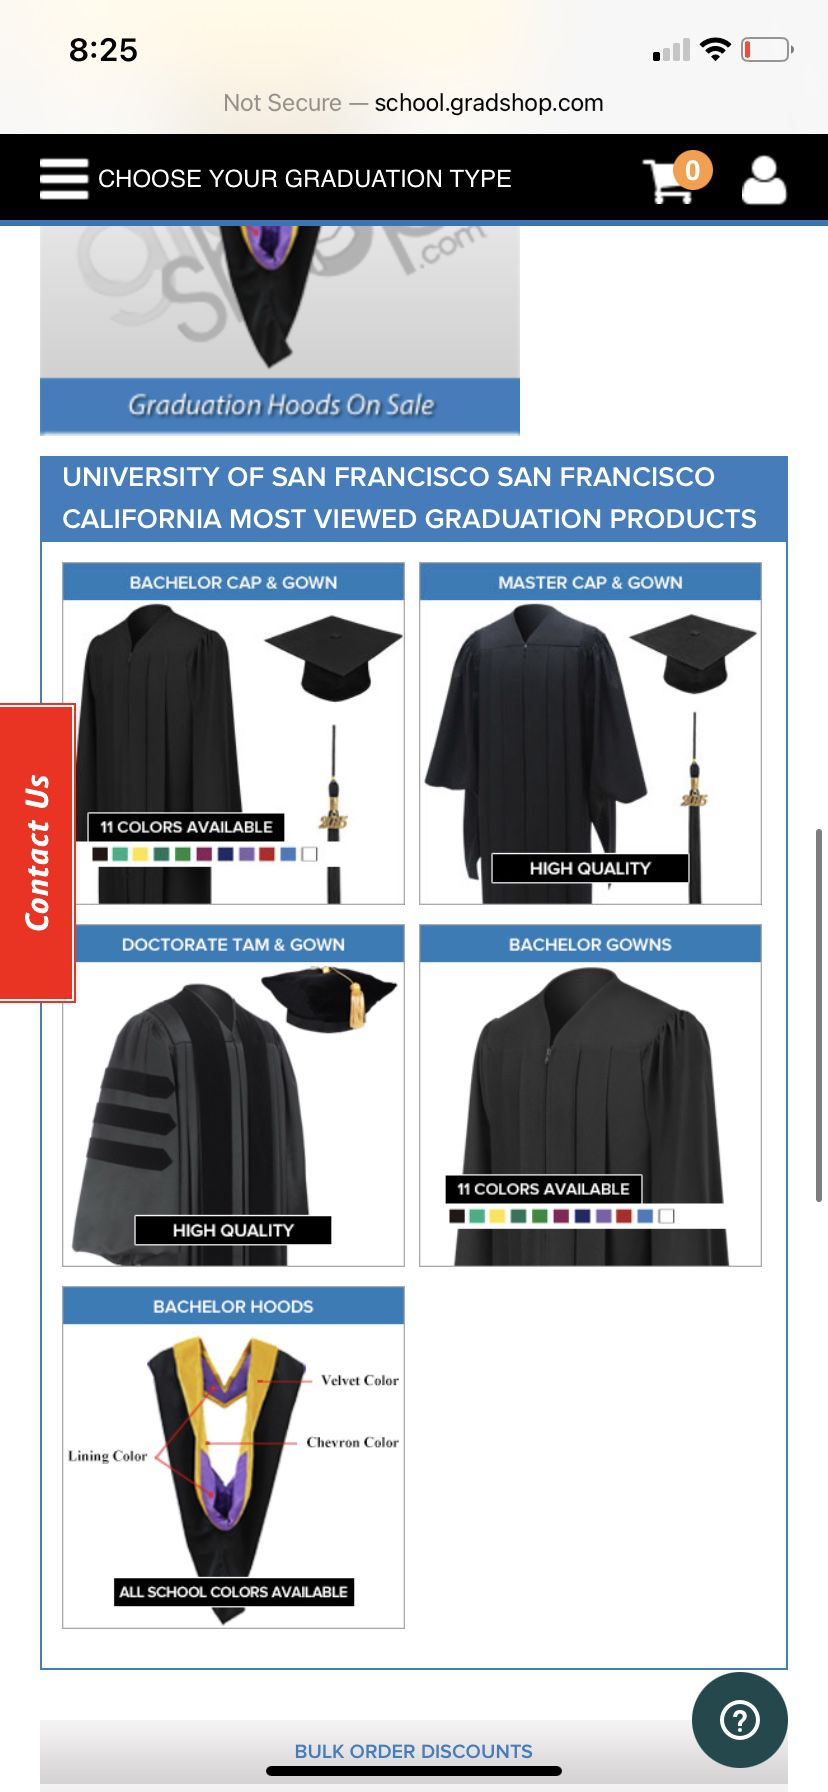 Masters Graduation Gown And Cap